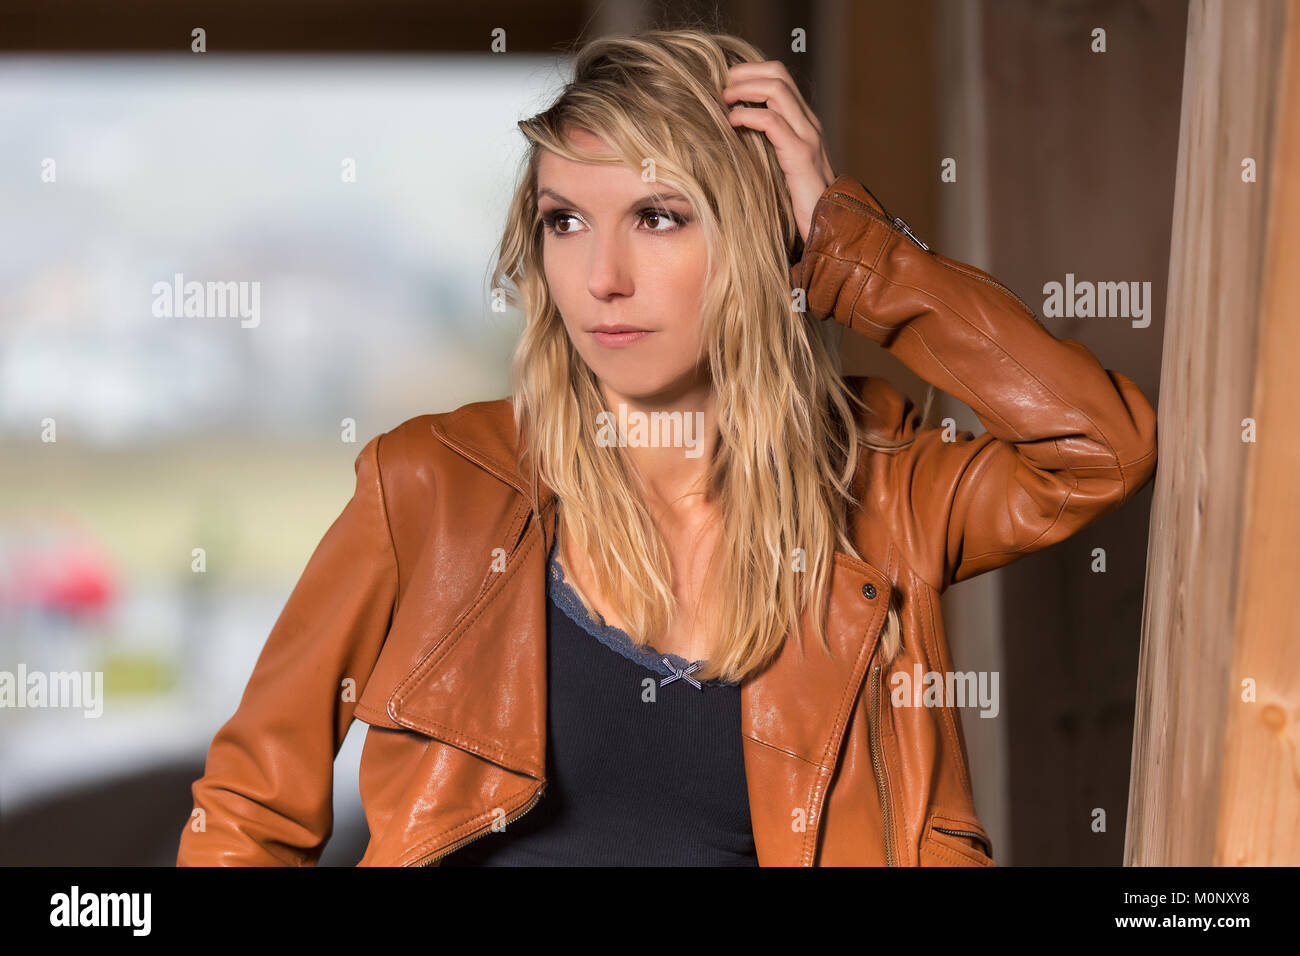 Woman blond with brown leather jacket,Fashion,Portrait,Lifestyle Stock Photo